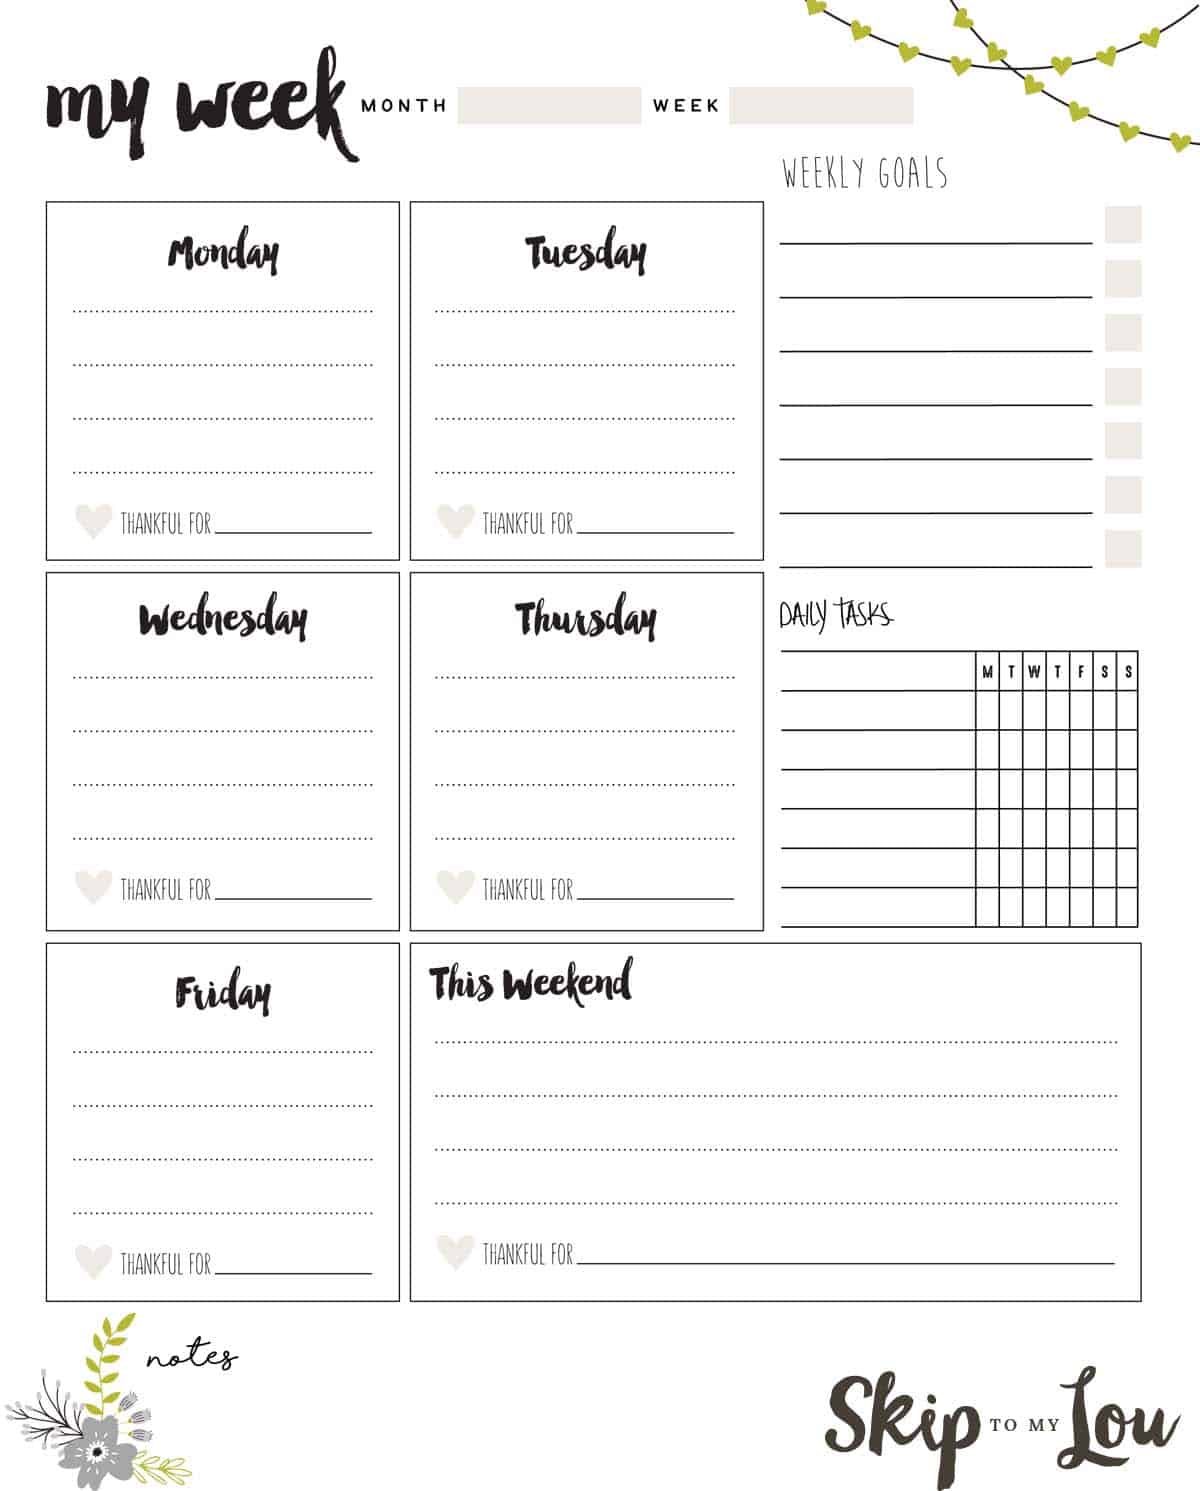 15 Printable Weekly Schedule Templates For Everyone to Utilize